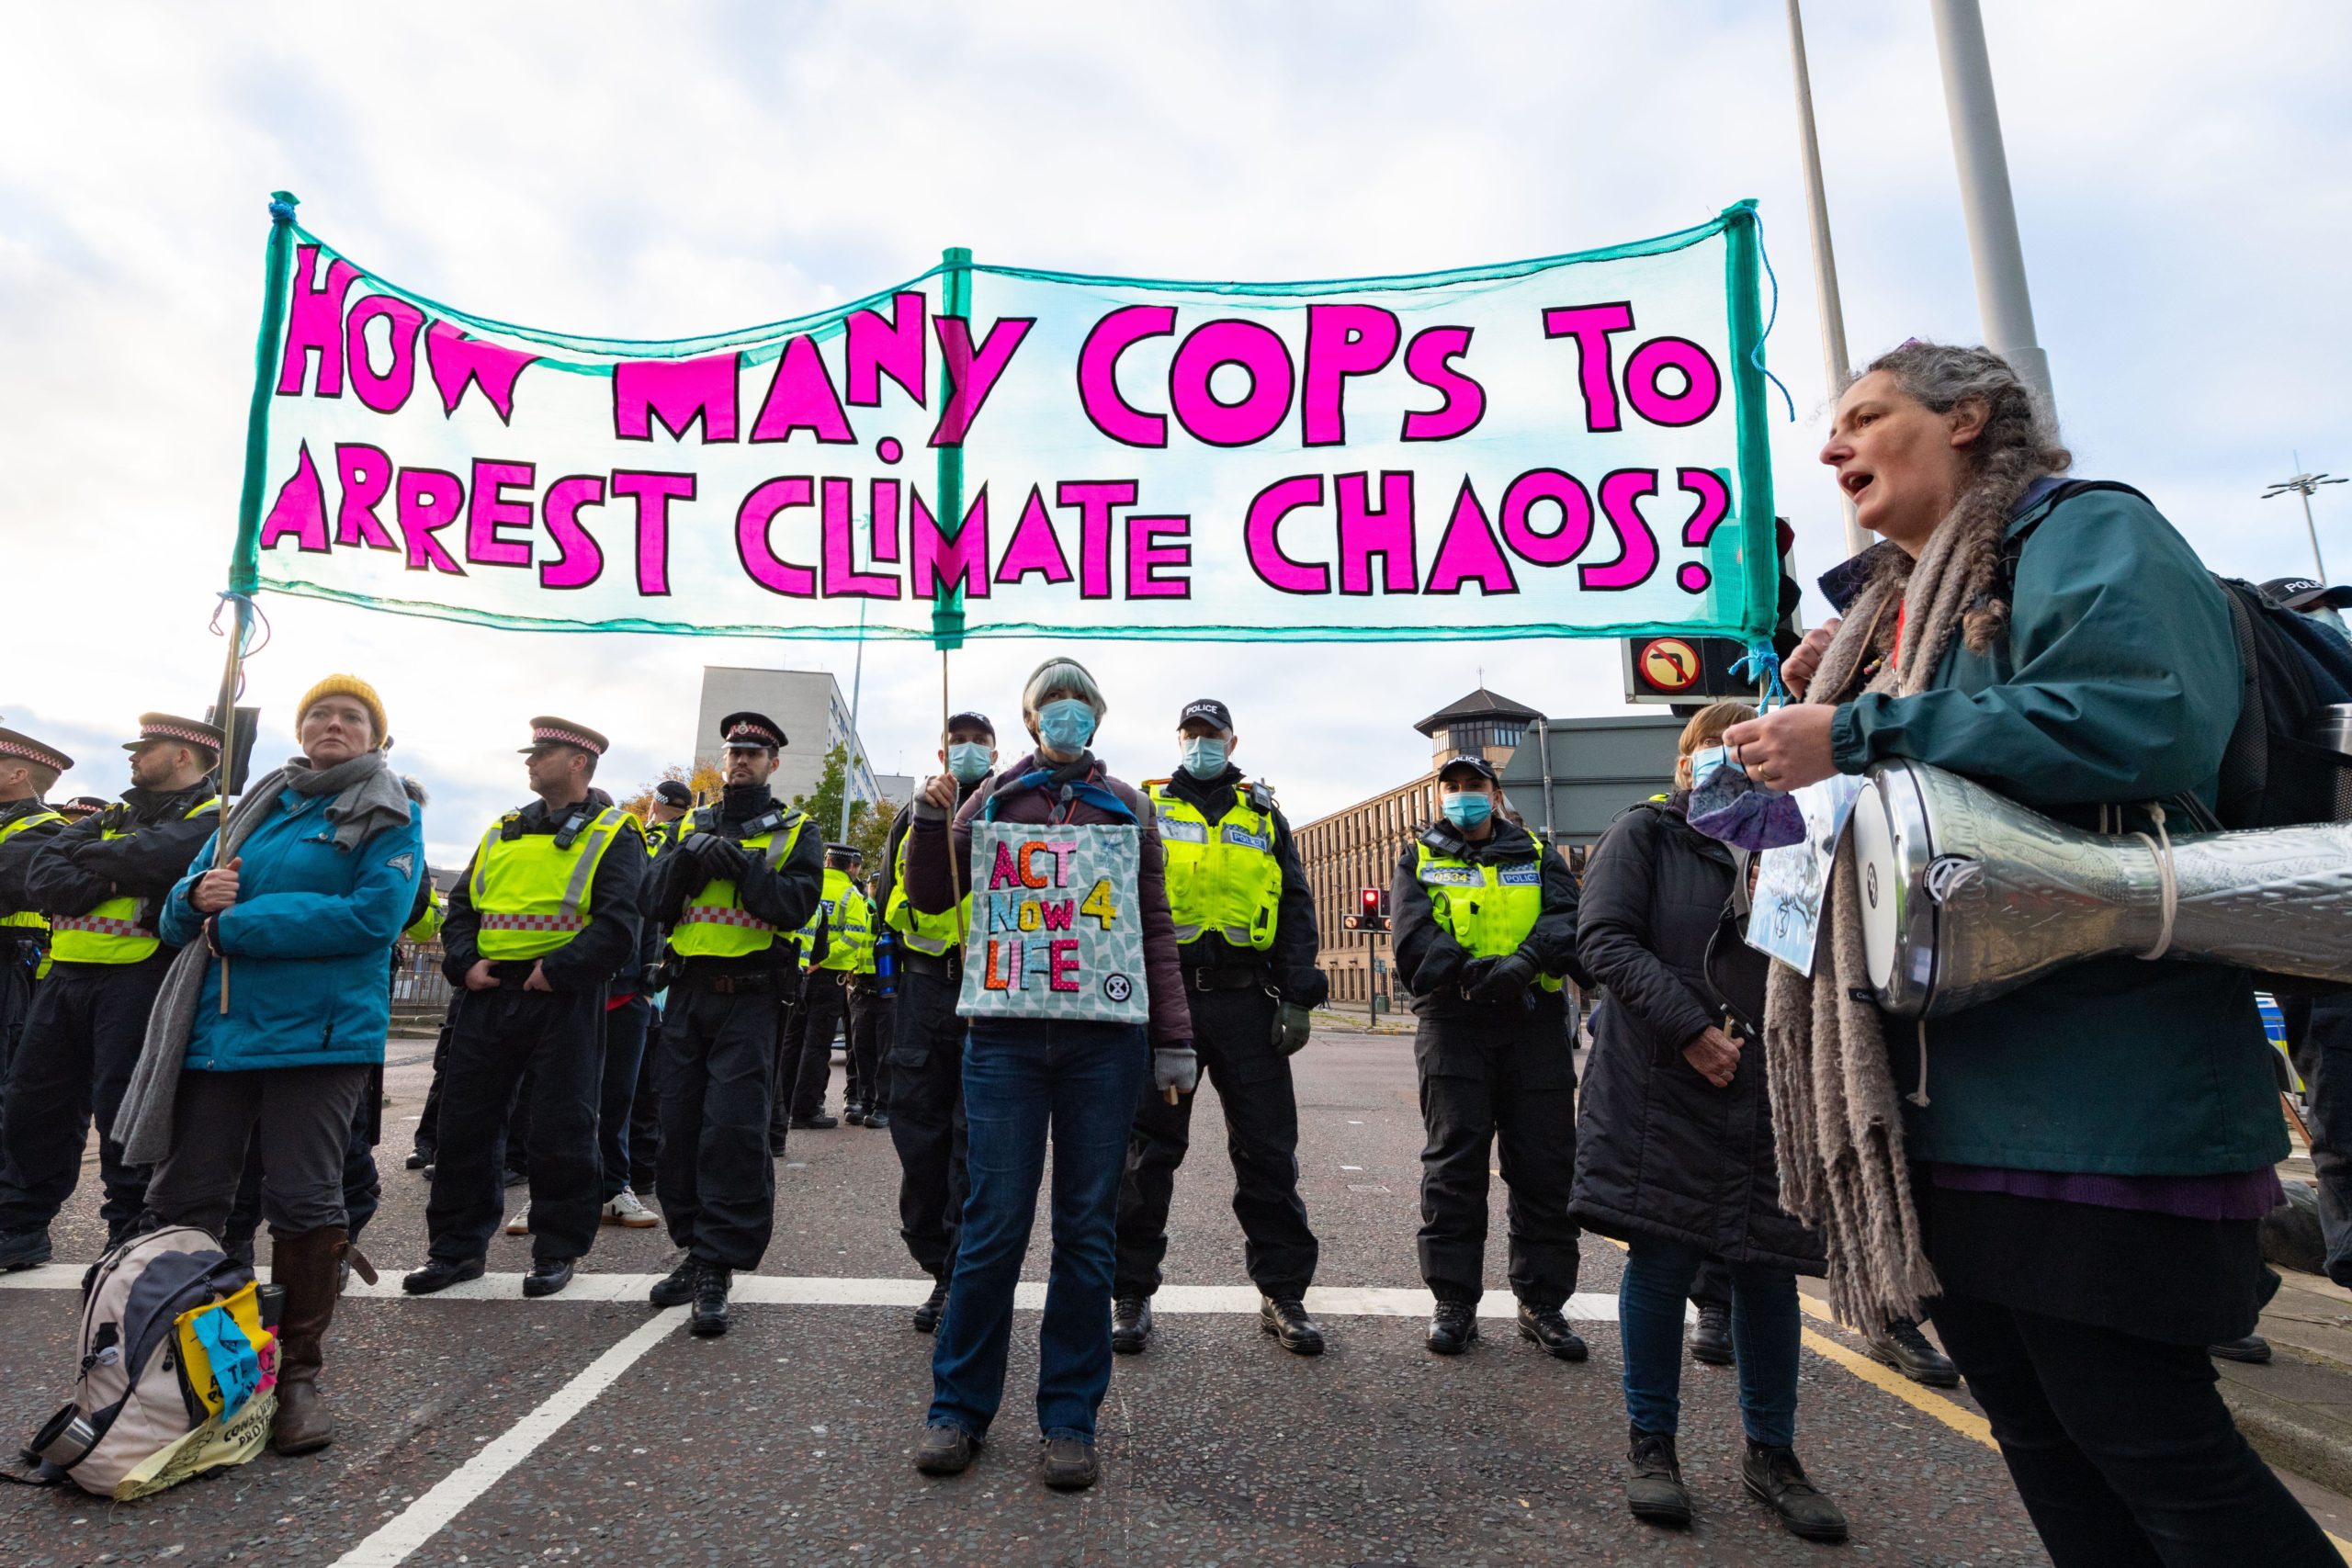 Extinction Rebellion protesters march in Glasgow, Scotland (Image: Alamy)